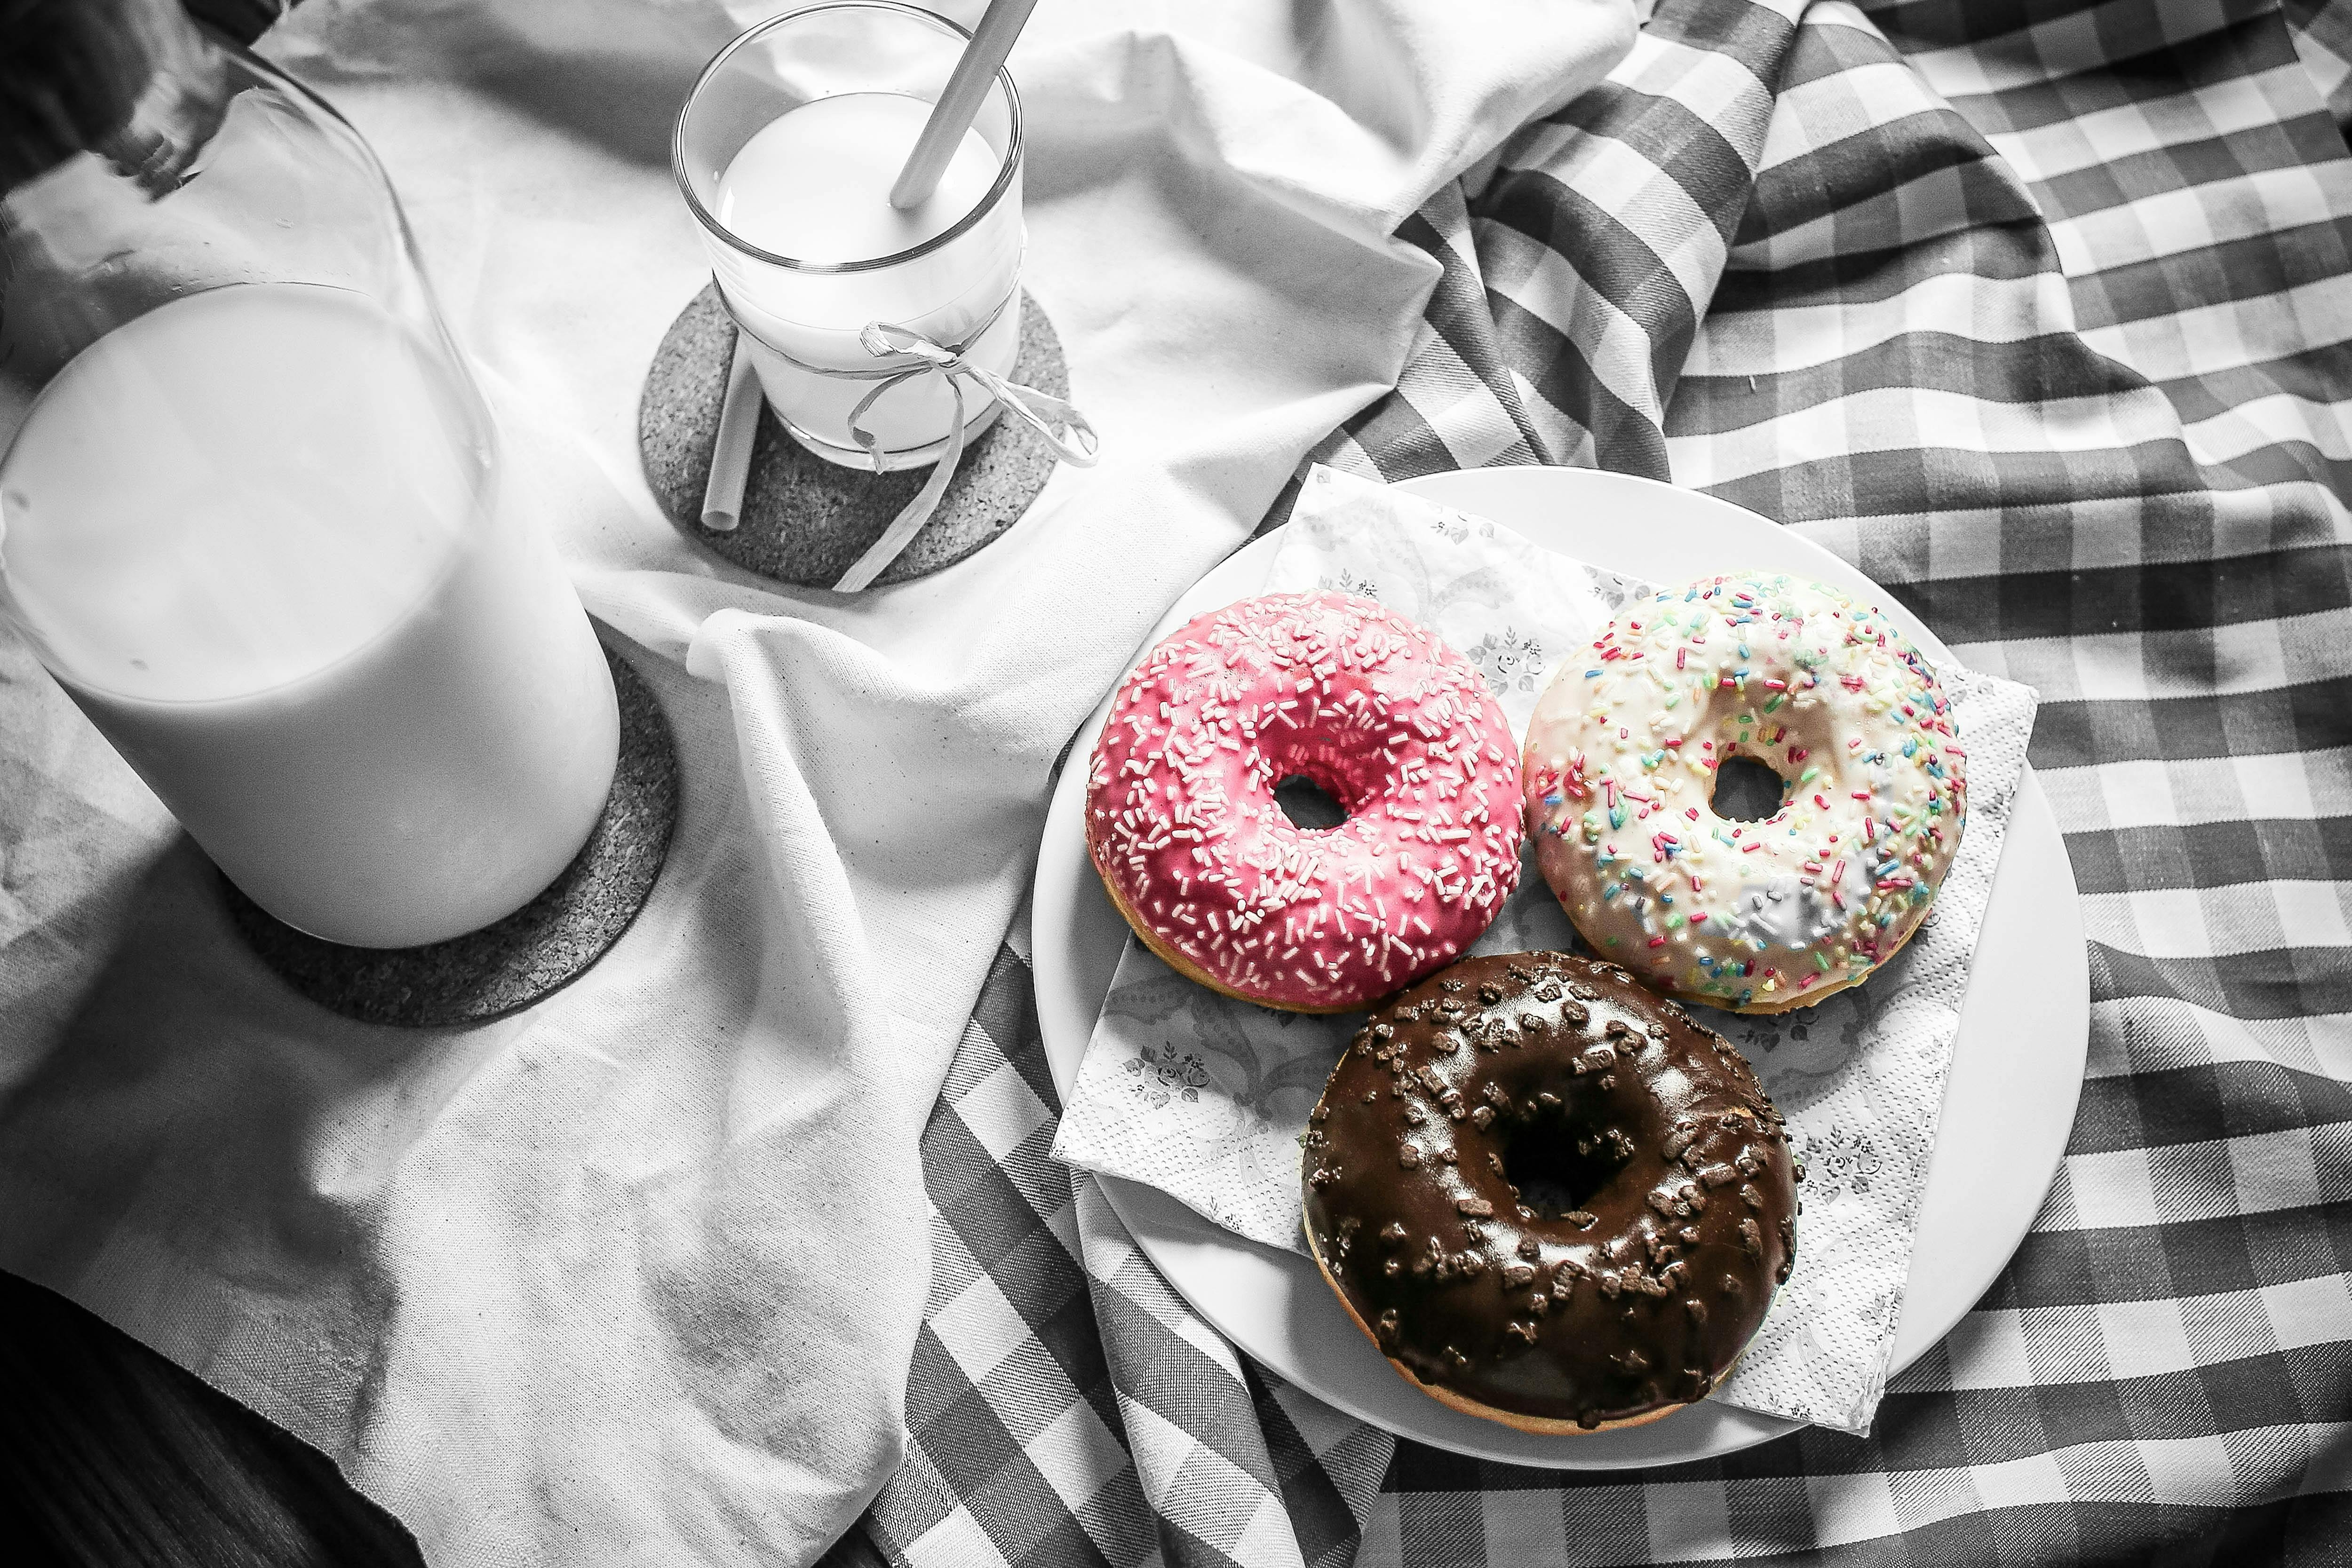 130 Doughnut HD Wallpapers and Backgrounds